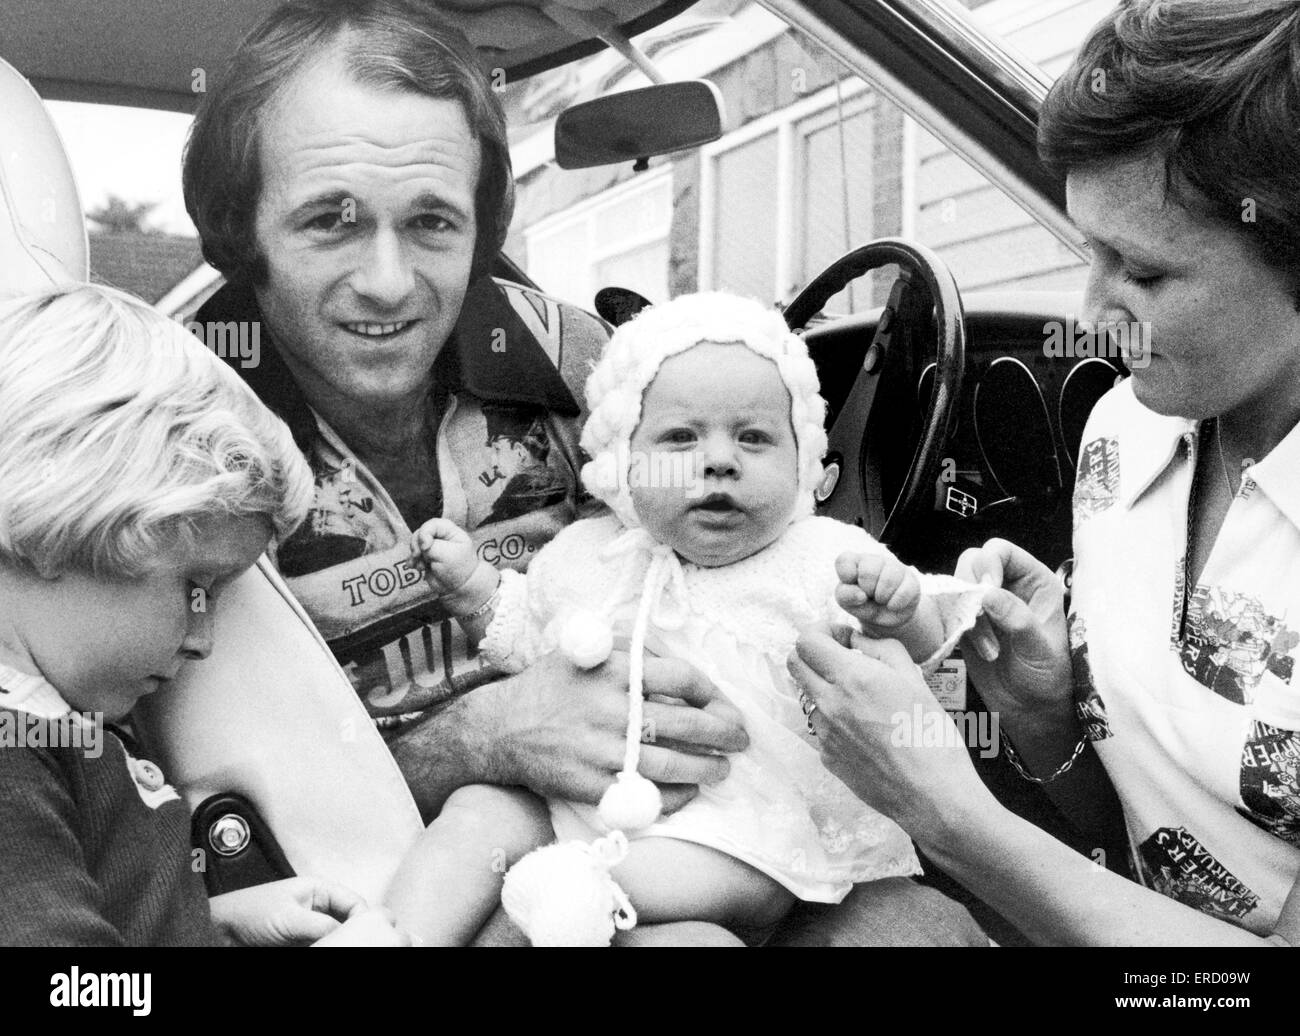 Derby footballer Archie Gemmill with wife Betty, their son Scott and baby daughter Stacey pictured in their car before going shopping. 31st October 1975. Stock Photo